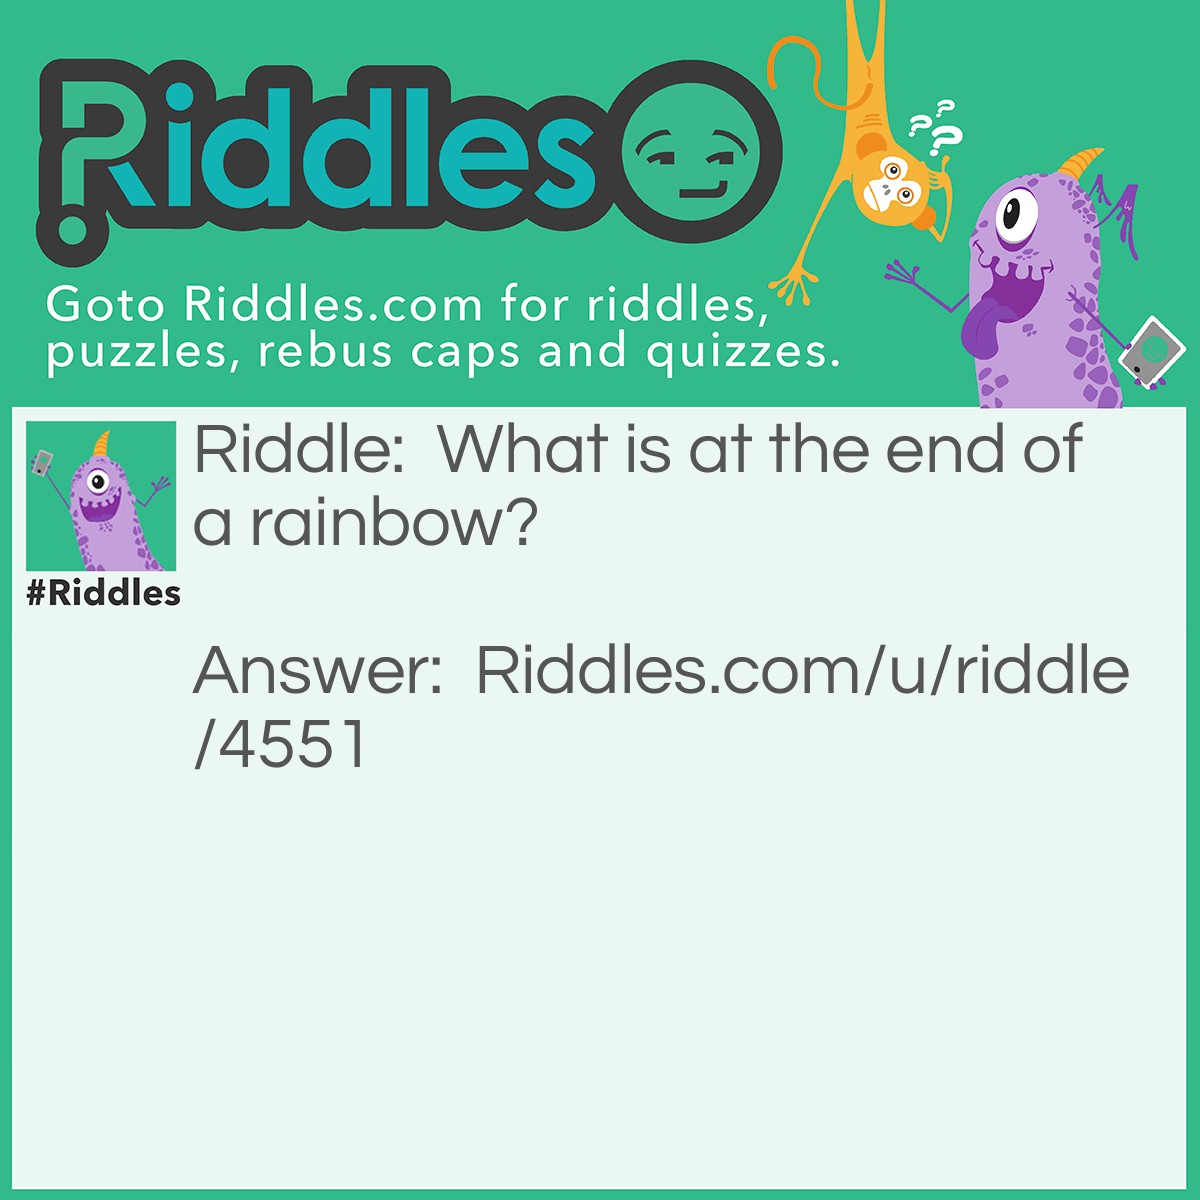 Riddle: What is at the end of a rainbow? Answer: The letter W.